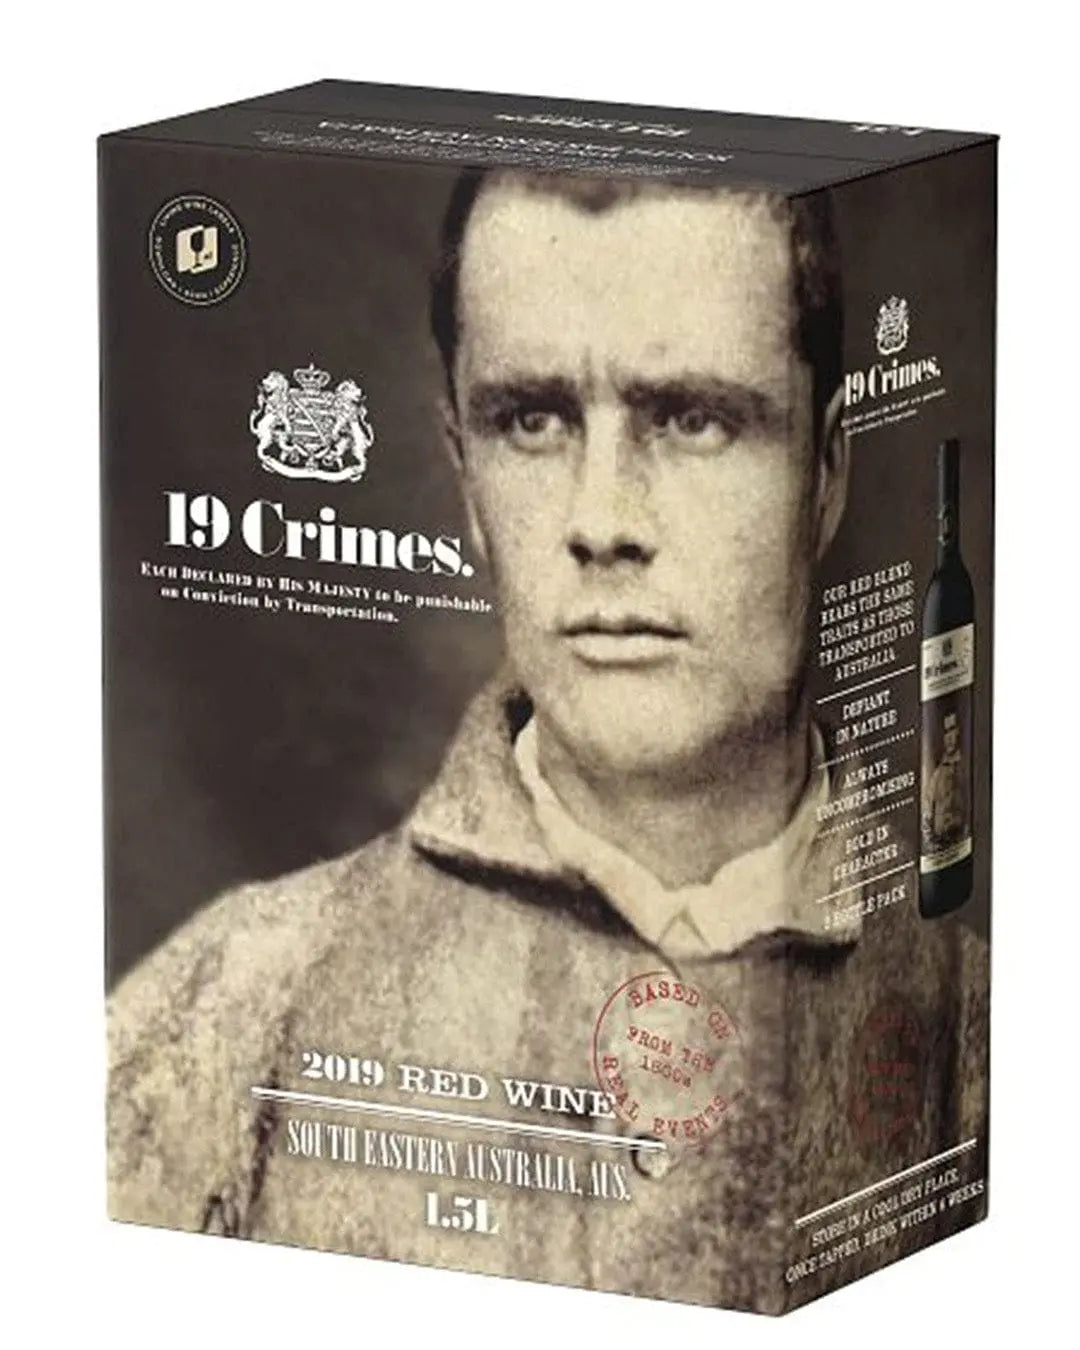 19 Crimes Red Bag in Box, 1.5 L Red Wine